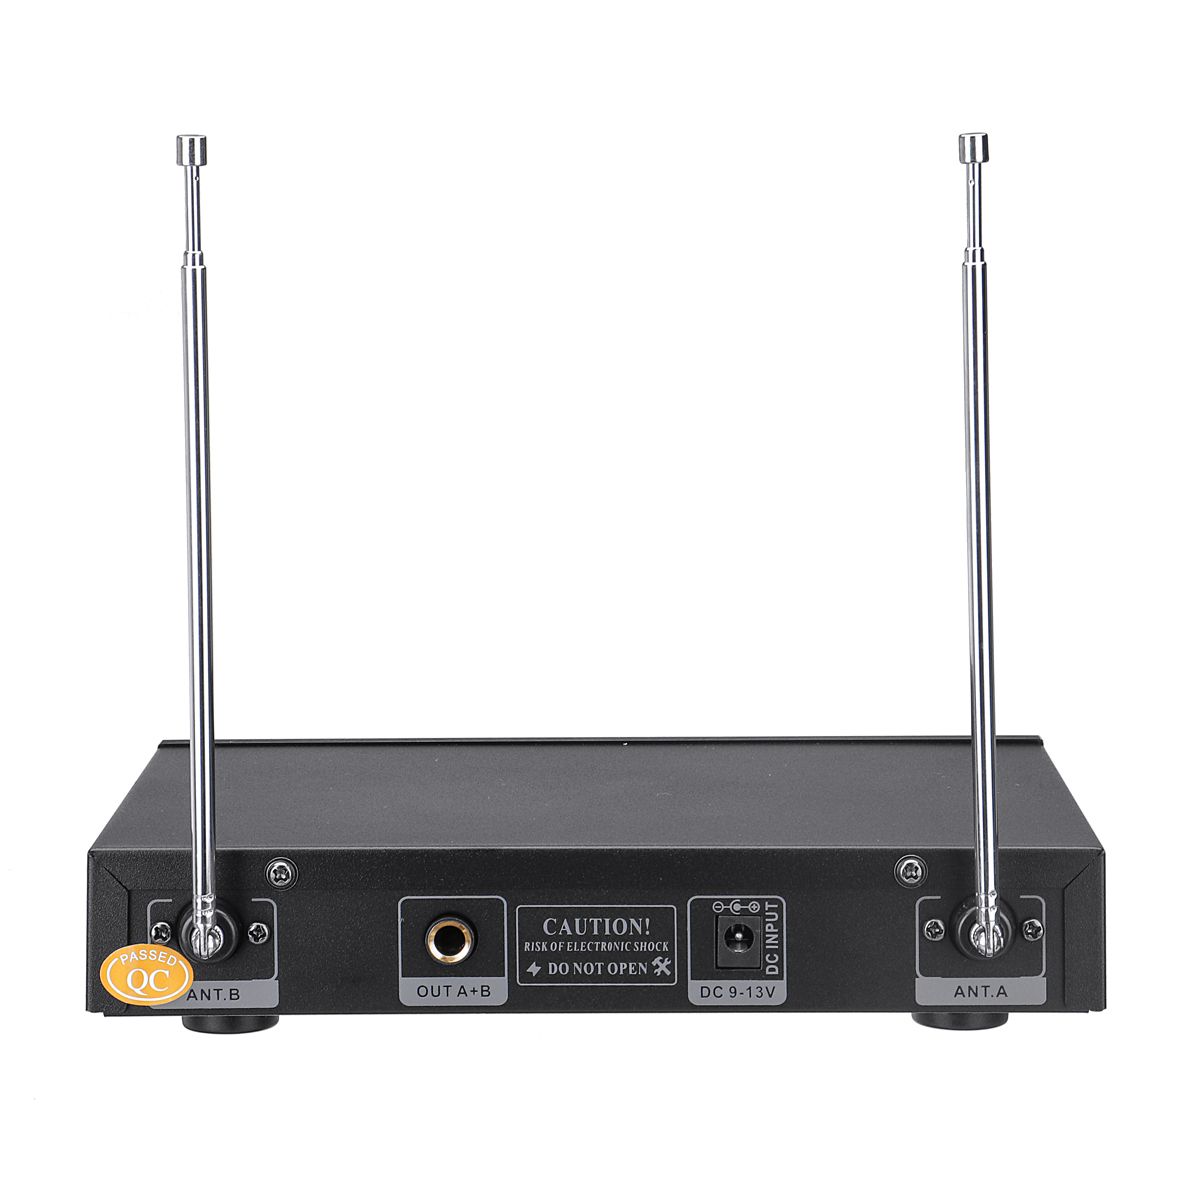 UHF-220-270MHz-Wireless-Microphone-System-Receiver-Dual-Mic-Handheld-Cordless-KTV-Stage-1468898